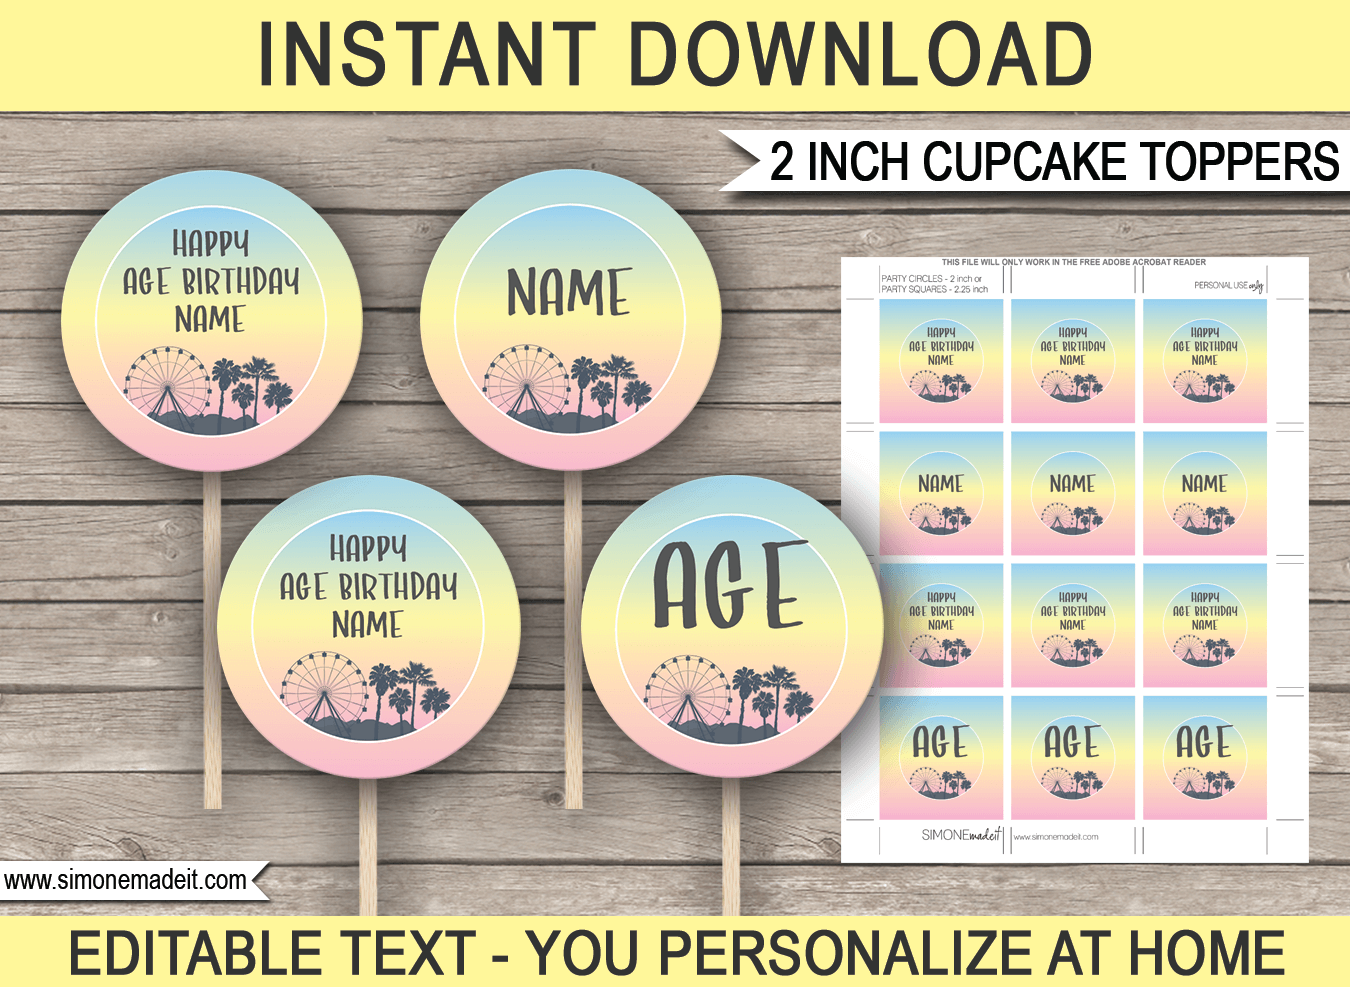 Printable Festival Themed Party Cupcake Toppers | 2 inch | Festival Theme Birthday Party | Gala, Fete, Fair, Carnival | DIY Editable Template | INSTANT DOWNLOAD via simonemadeit.com